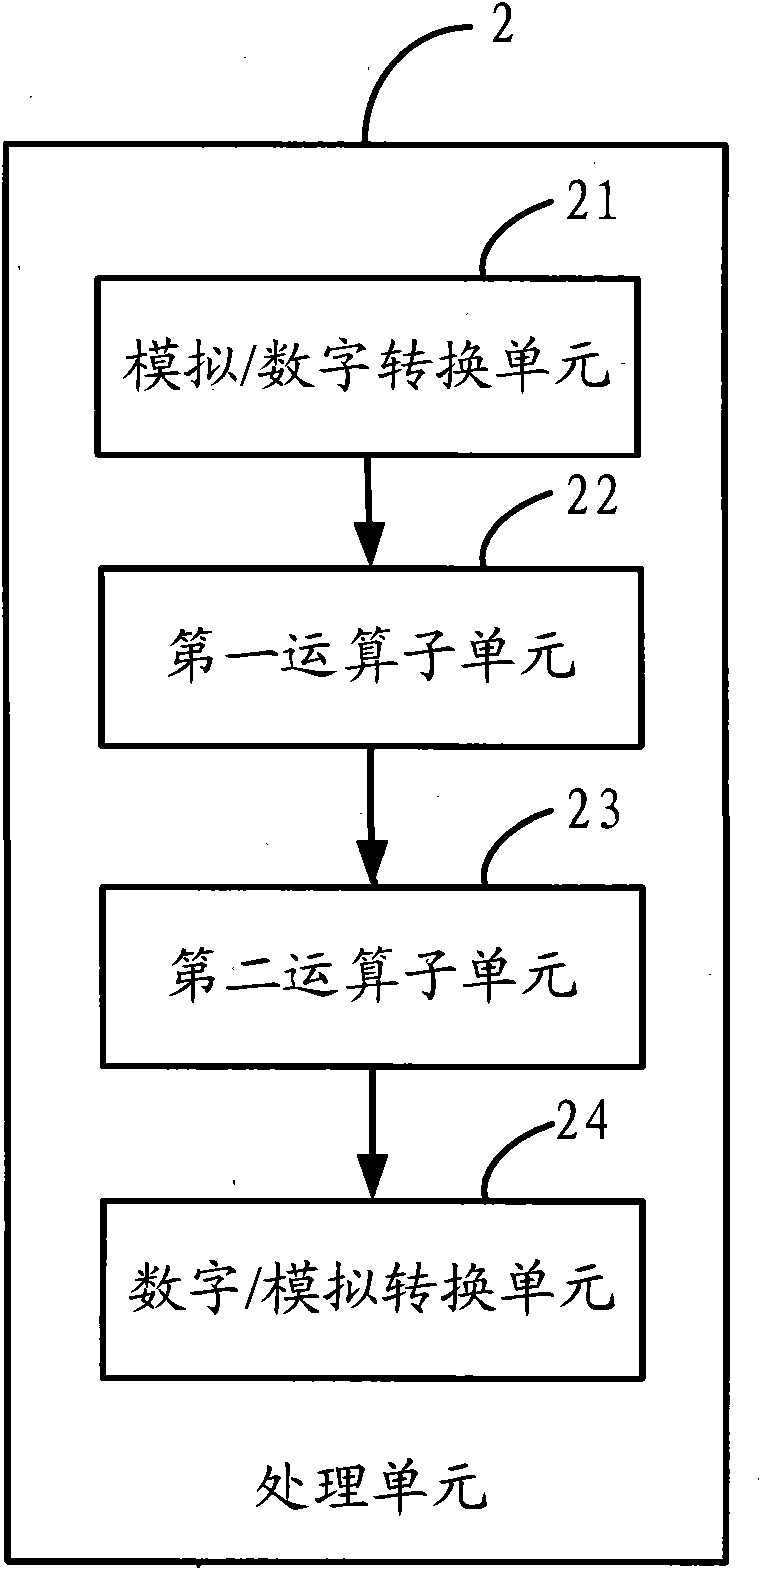 Method and device for acquiring sound signal based on sensor